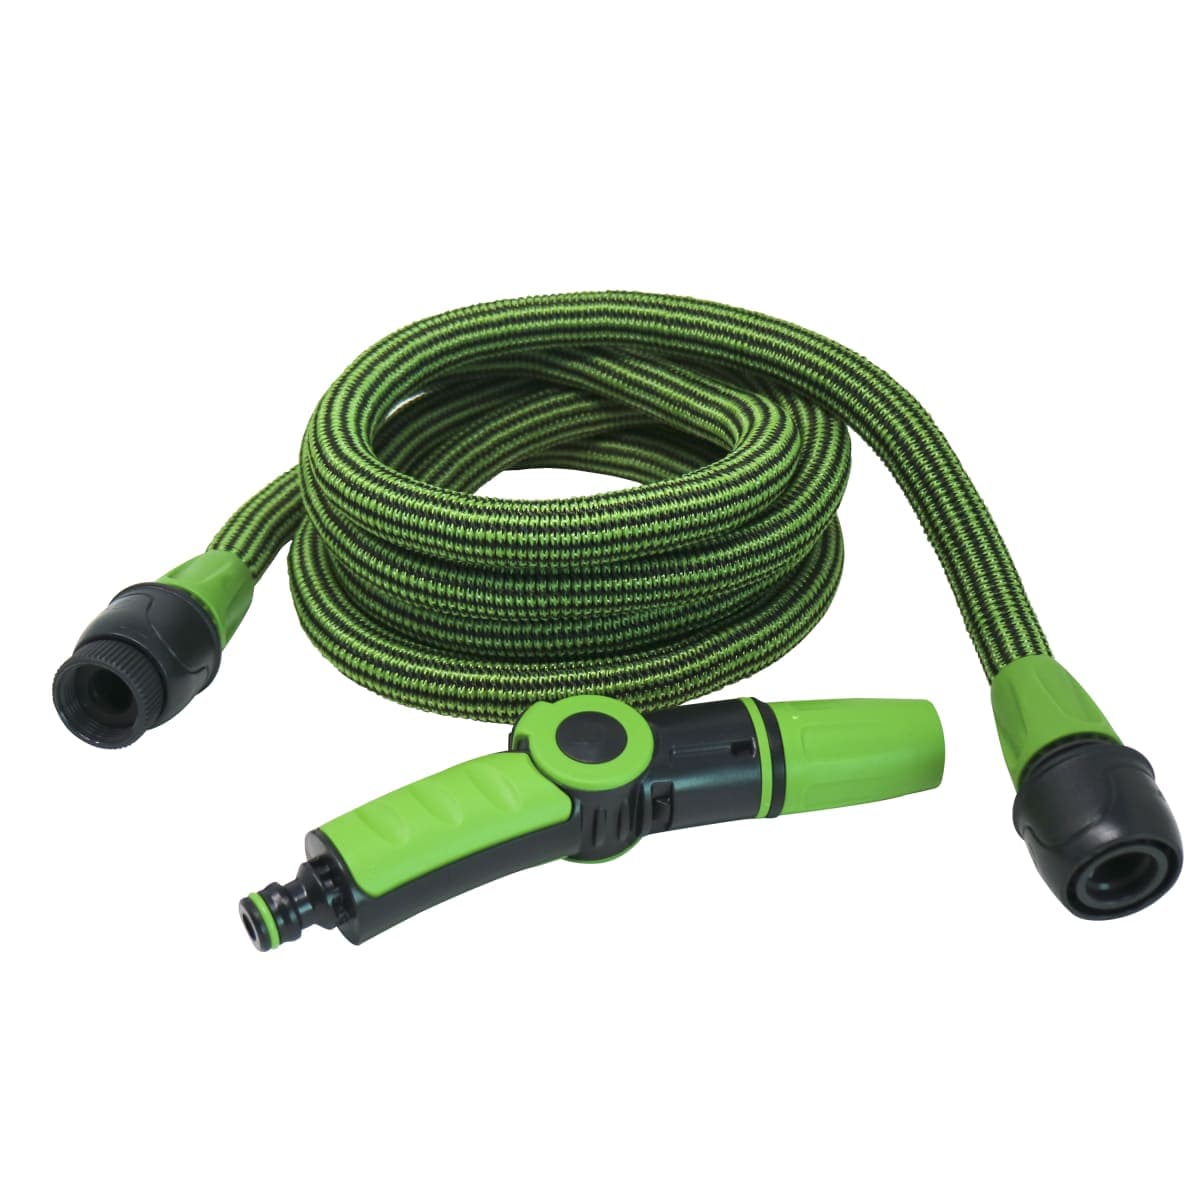 GEOLIA FABRIC EXTENSION HOSE 15M WITH 3JET COMPACT LANCE - best price from Maltashopper.com BR500015642